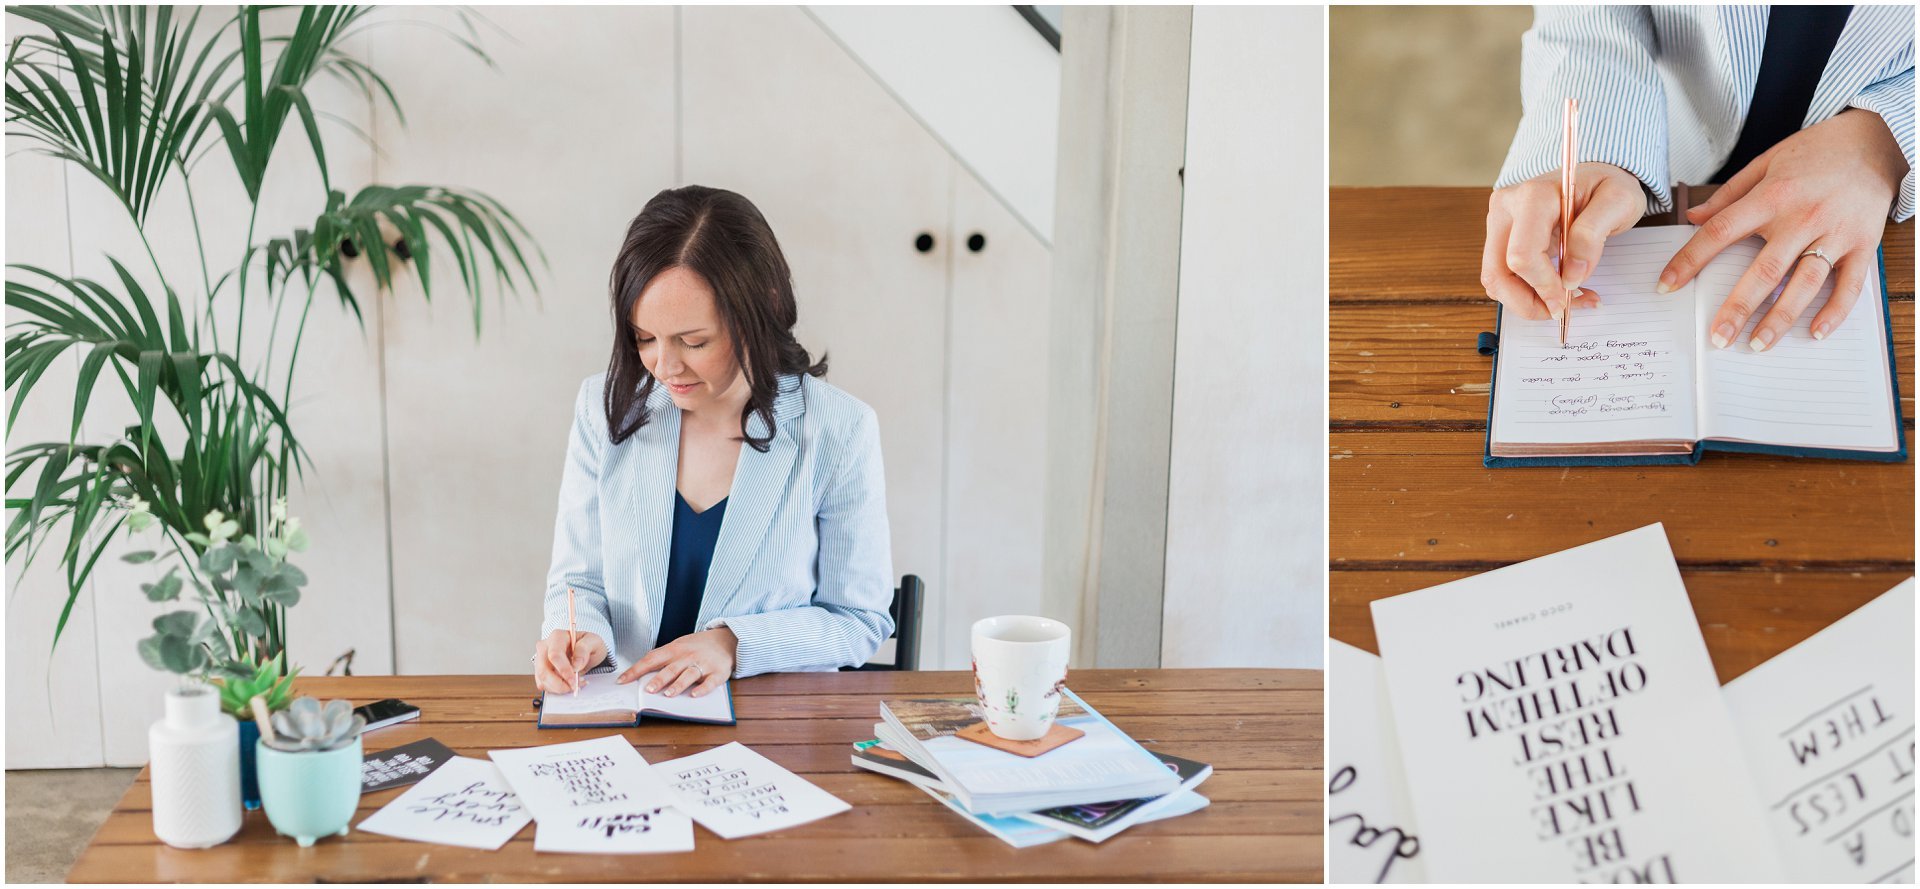 mini brand session with Erin Spurling at home with notepad, image by AKP Brand Photographer AKP Branding Stories